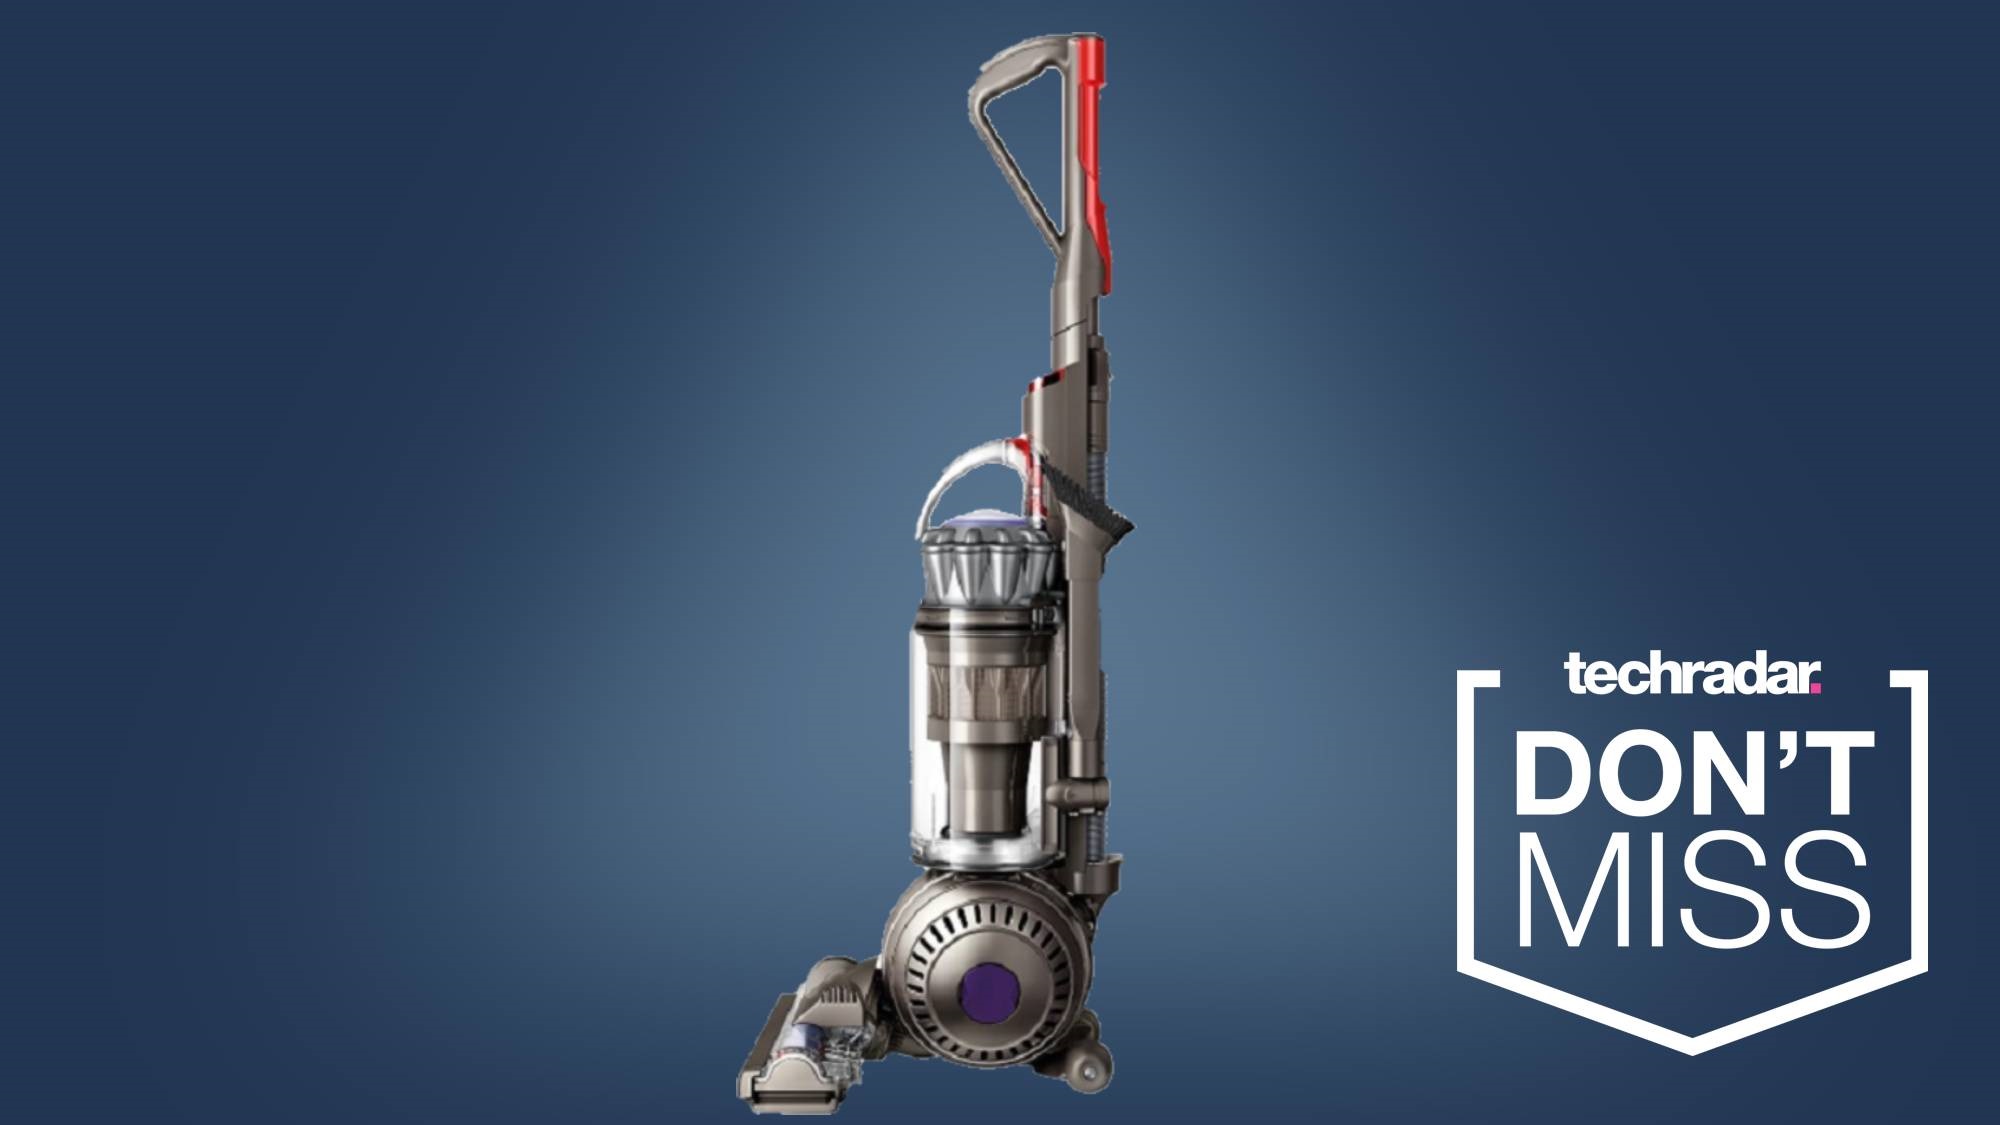 Save $150 on this Dyson upright vacuum for Cyber Monday when you shop ...